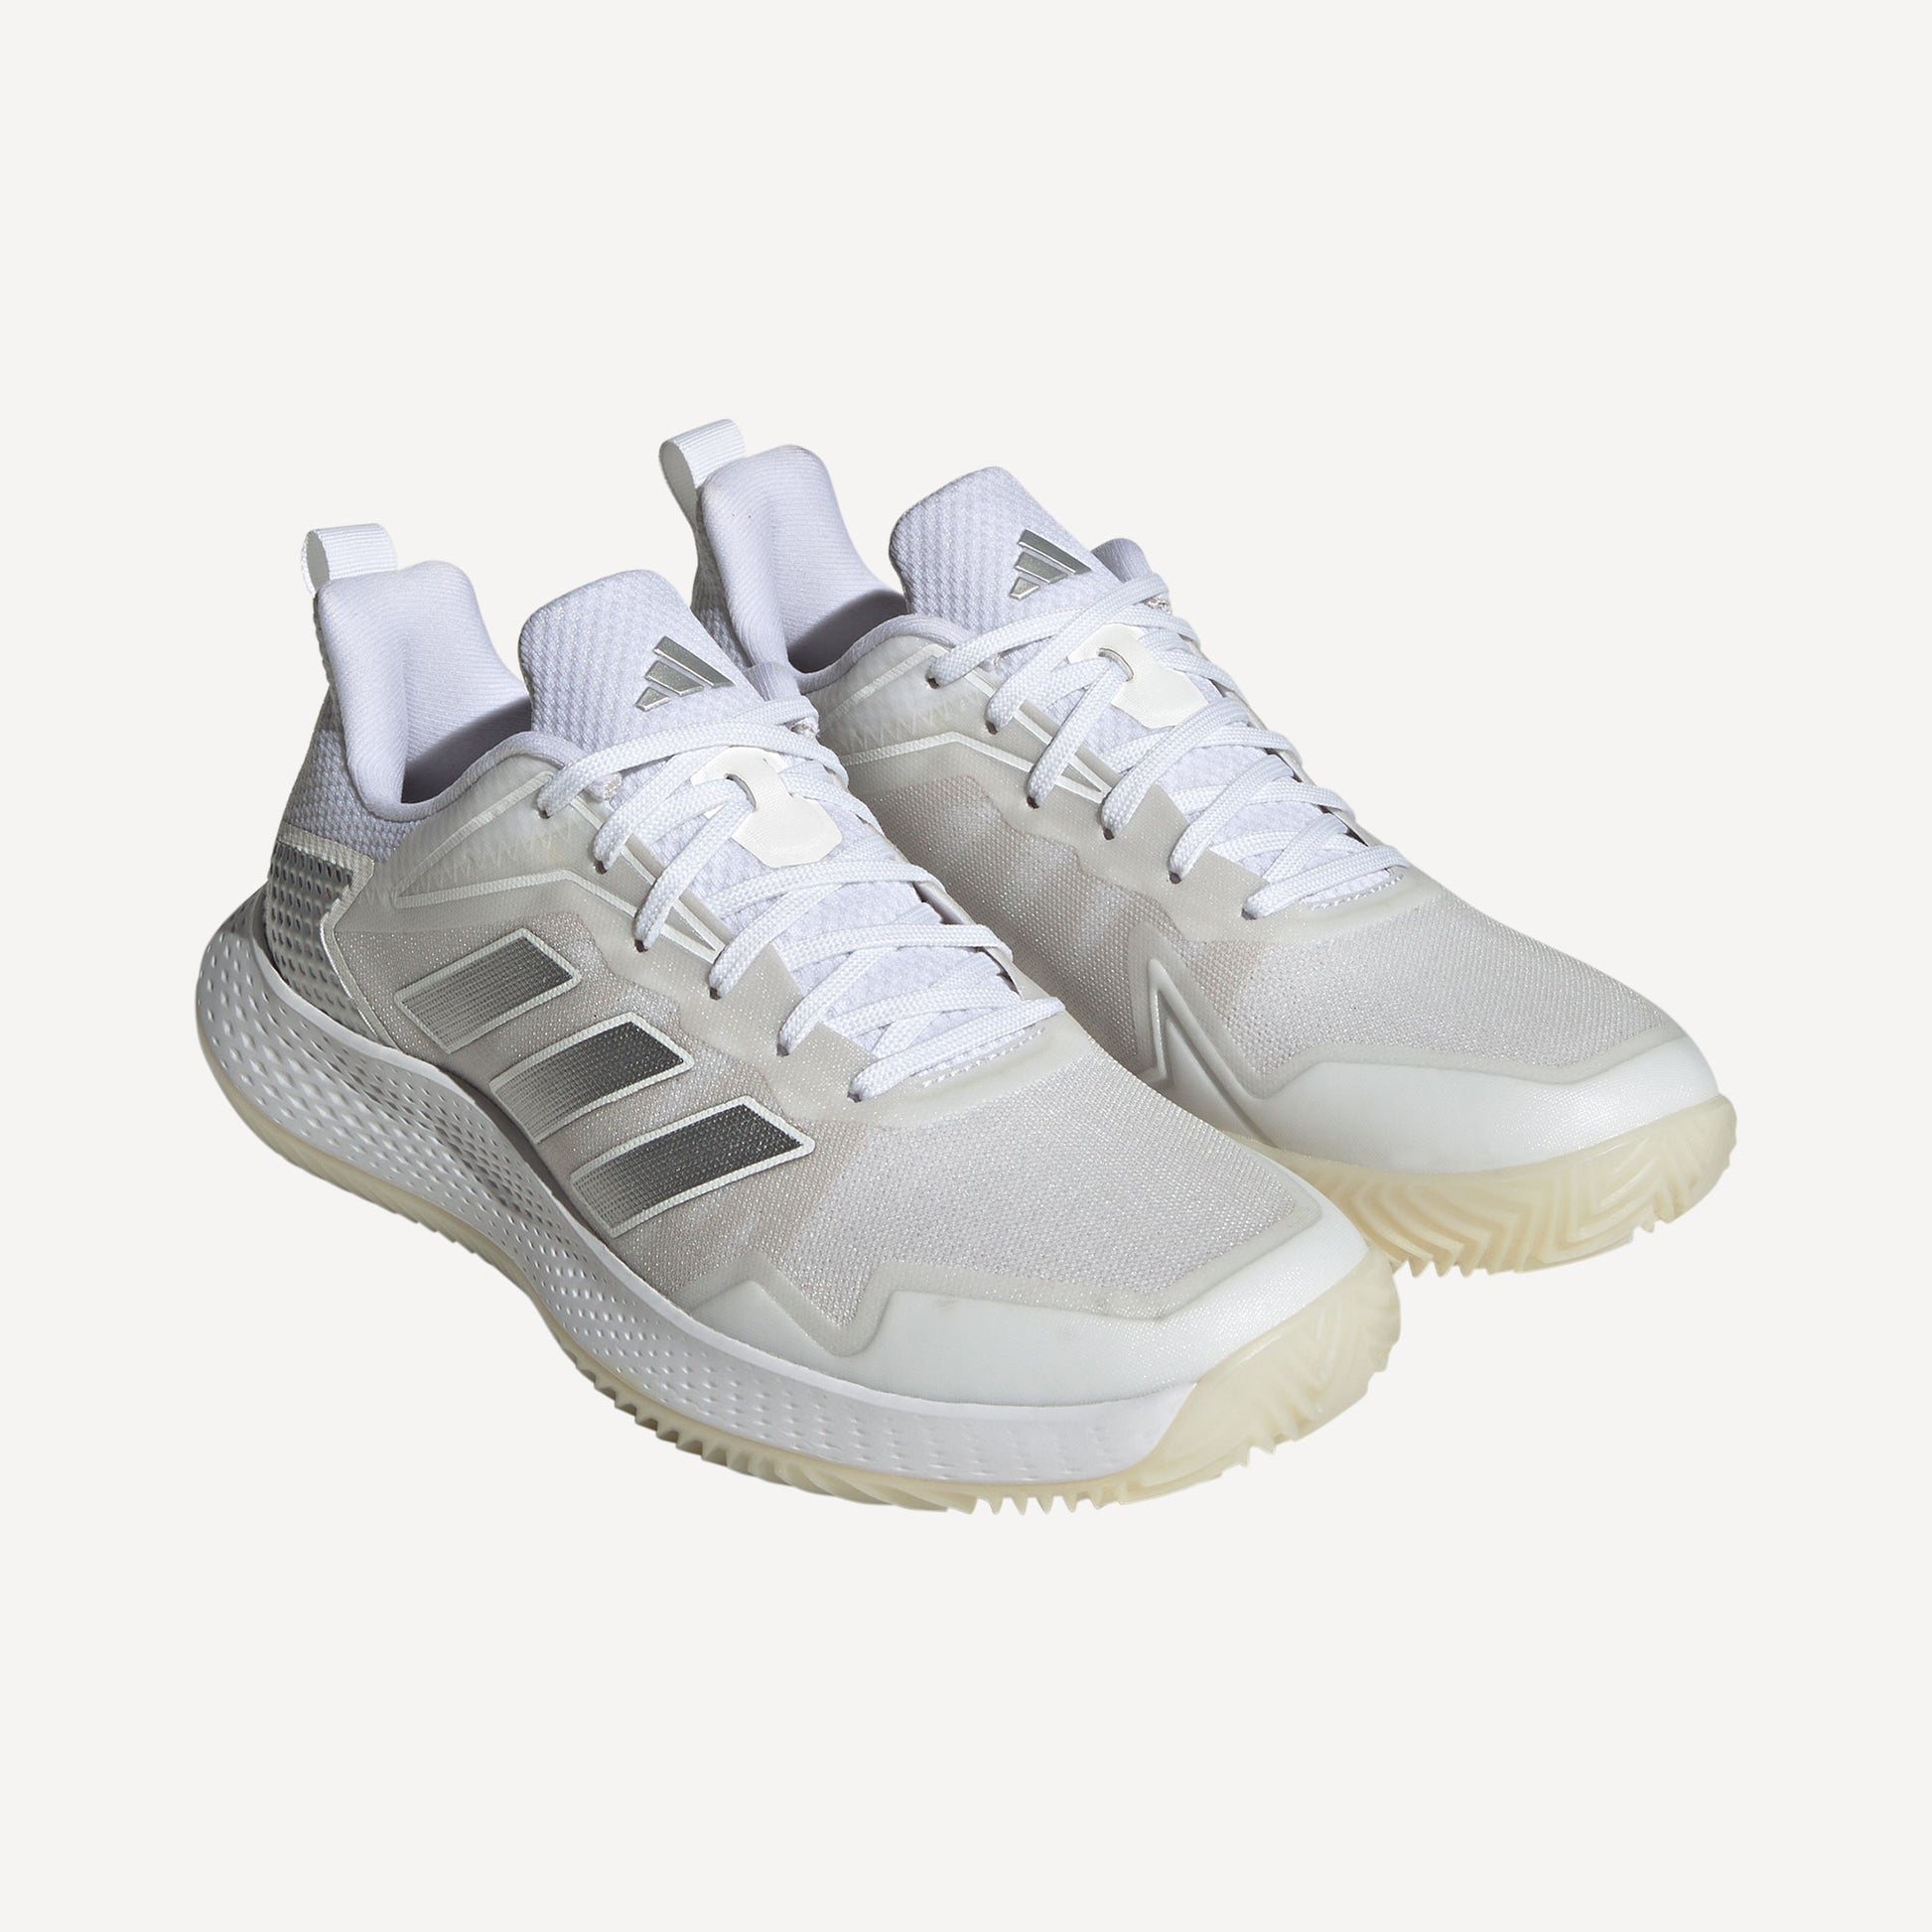 adidas Defiant Speed Women's Clay Court Tennis Shoes White (5)